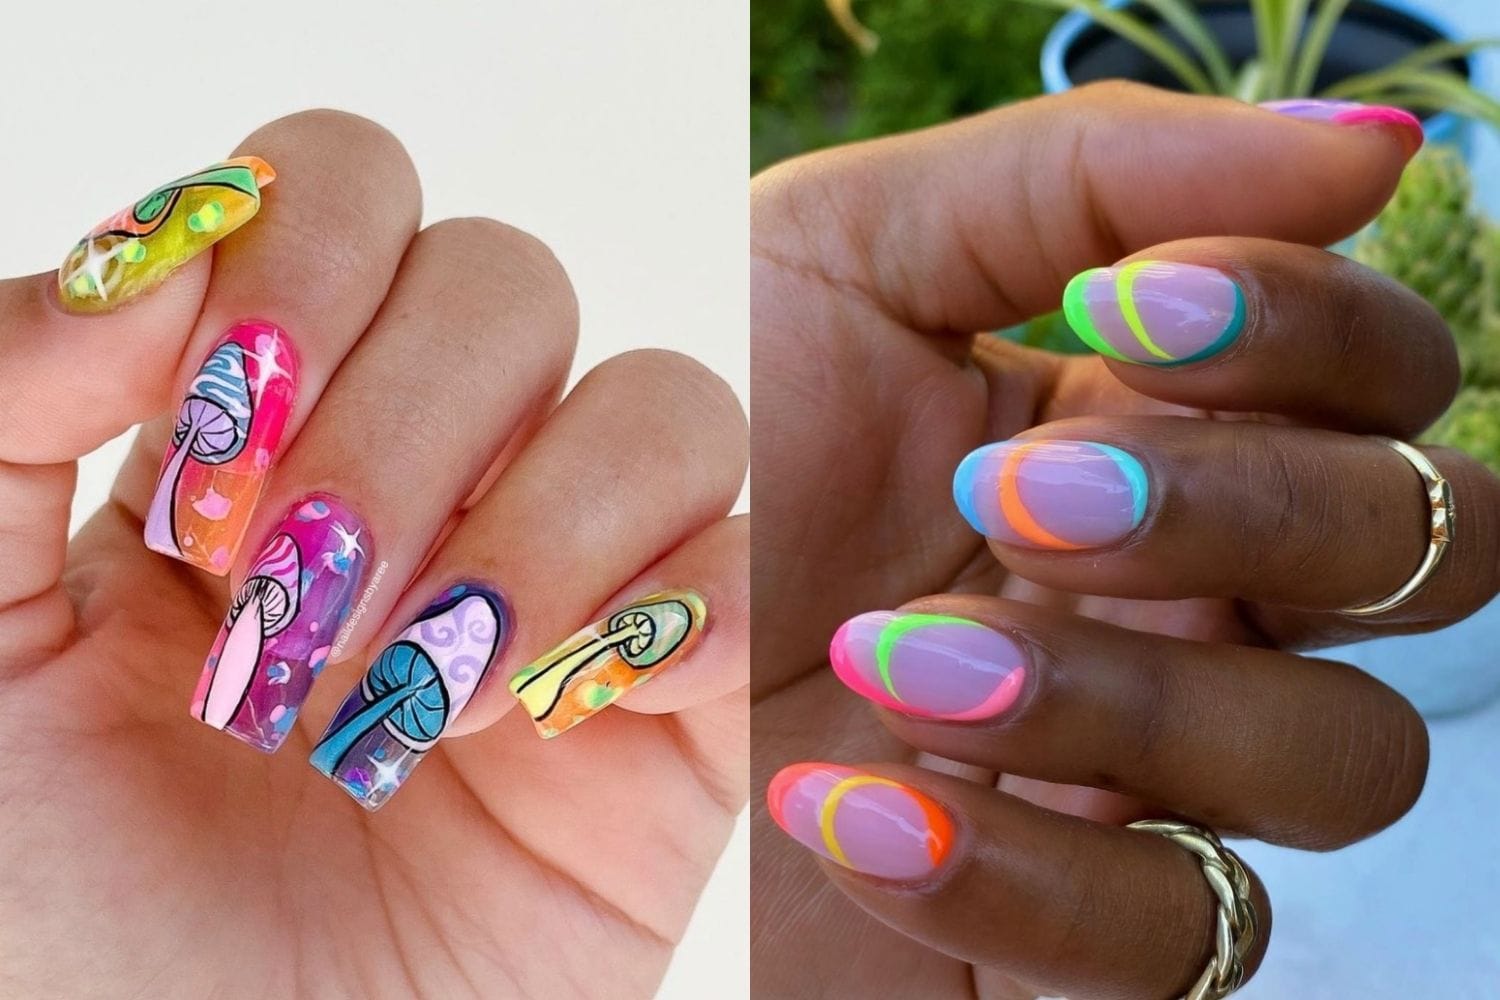 3. "How to Achieve the Perfect Bright Summer Nail Color with a Tip" - wide 9